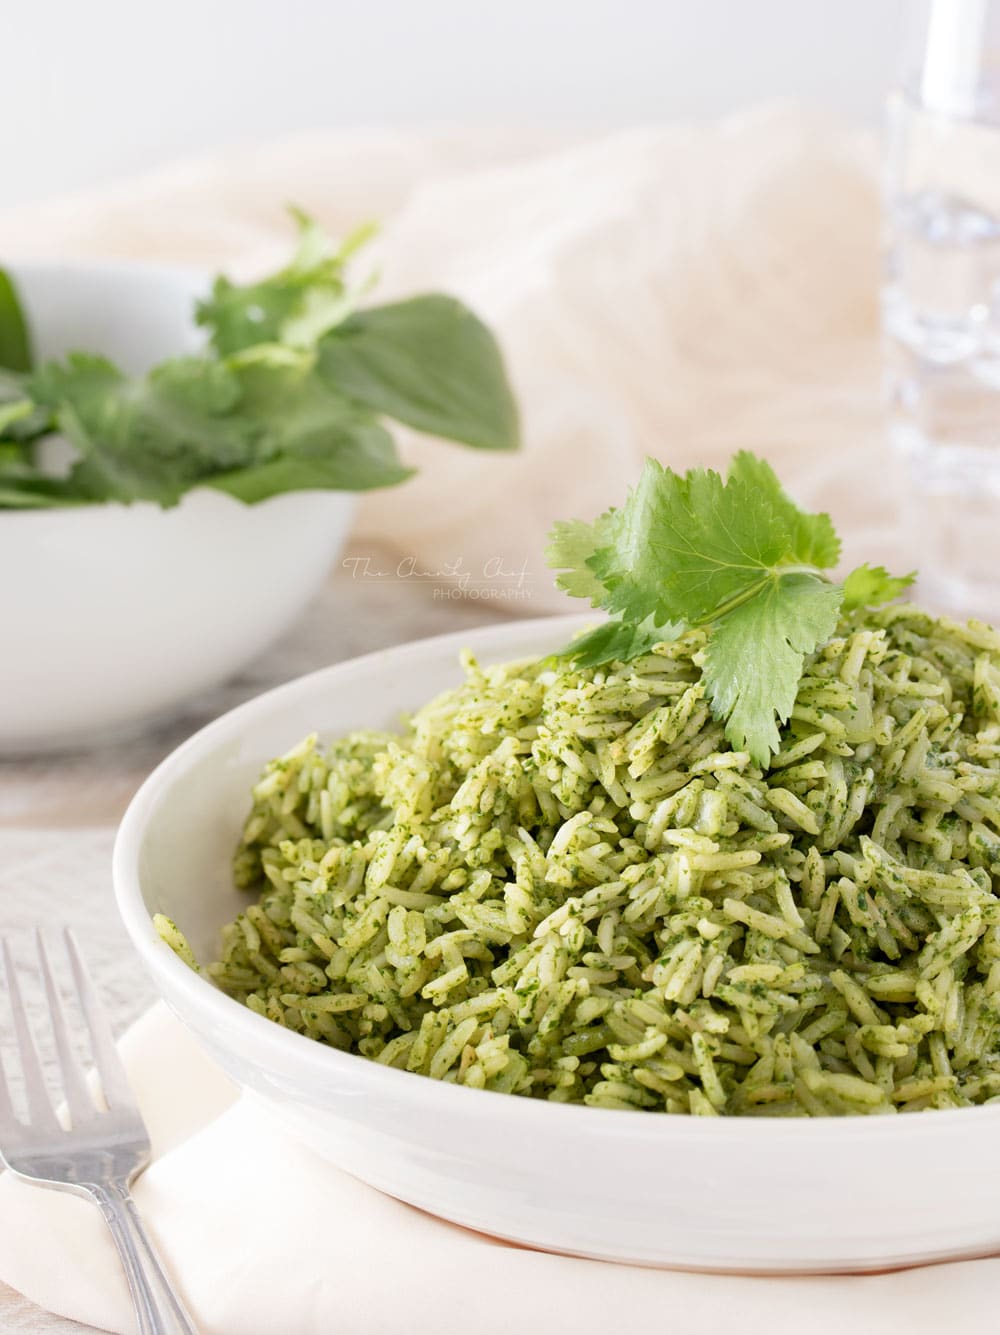 Arroz Verde Green Rice | This green rice, or arroz verde, is so rich and full of flavor... not to mention the vibrant green color! You can pair this rice with any main dish! | http://thechunkychef.com